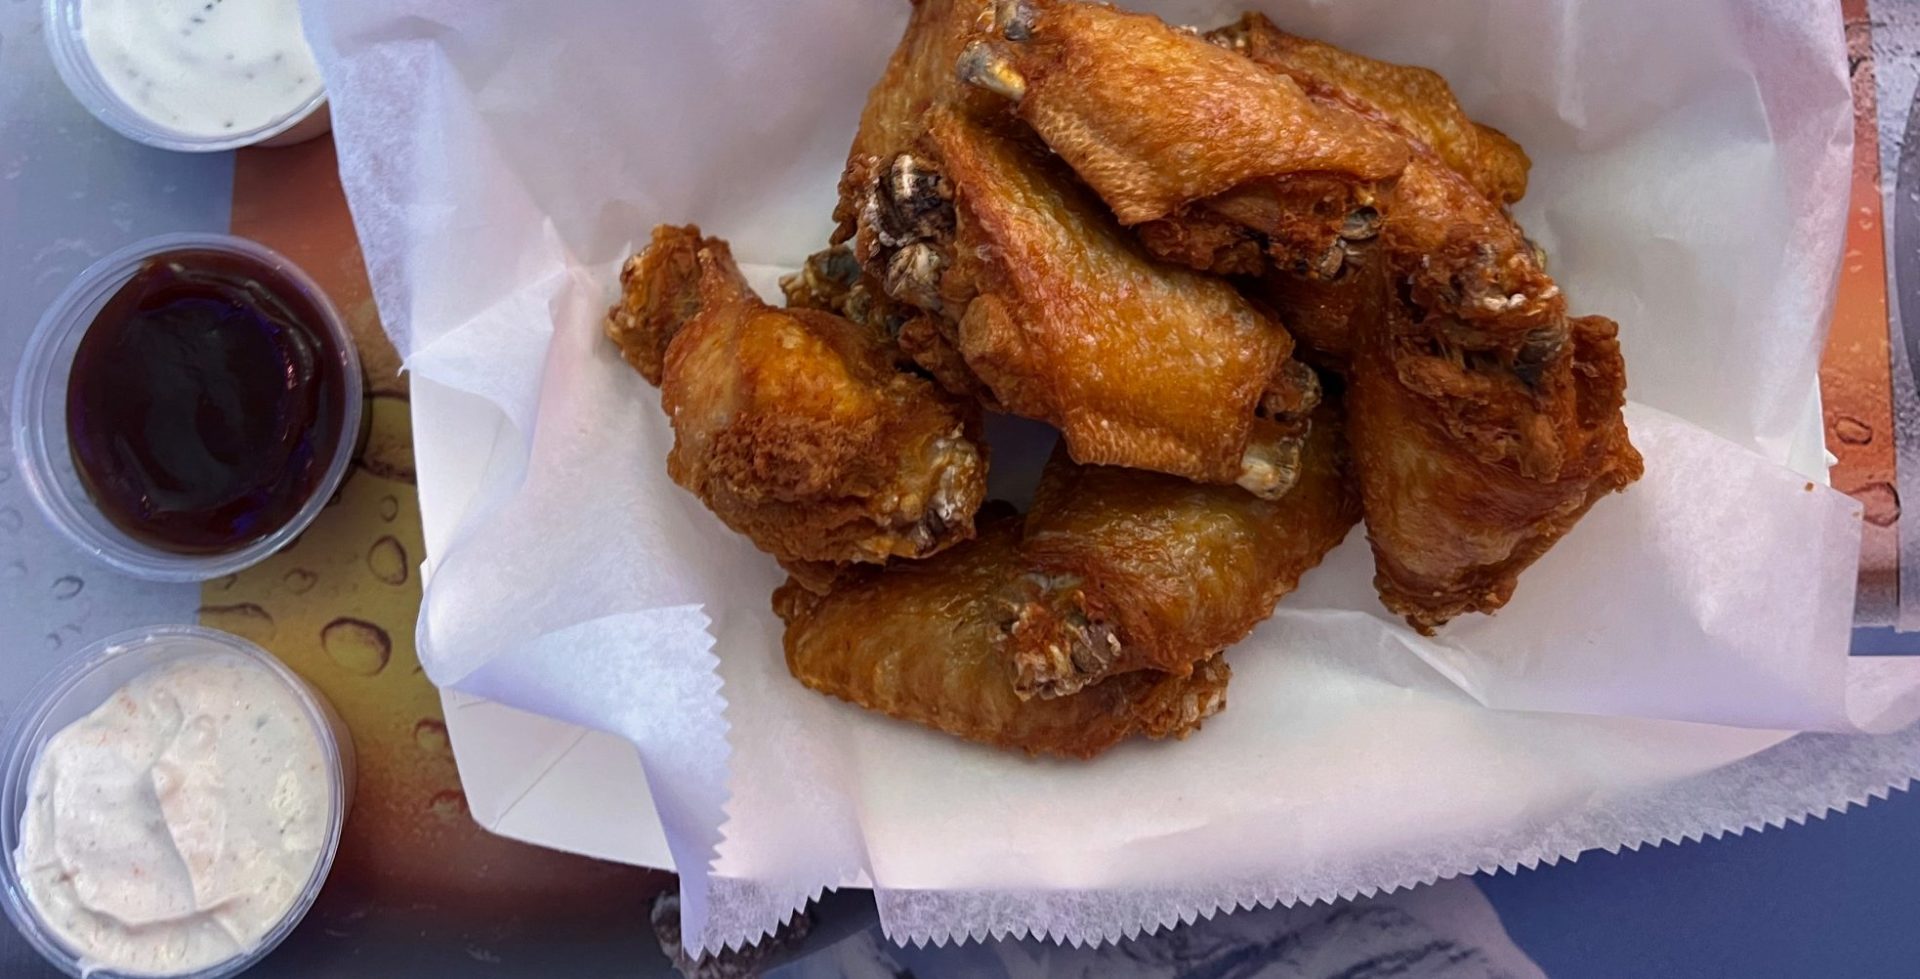 An order of ten wings in a parchment-paper lined basket beside two sauces (one ranch, one barbecue, and one white zesty sauce).